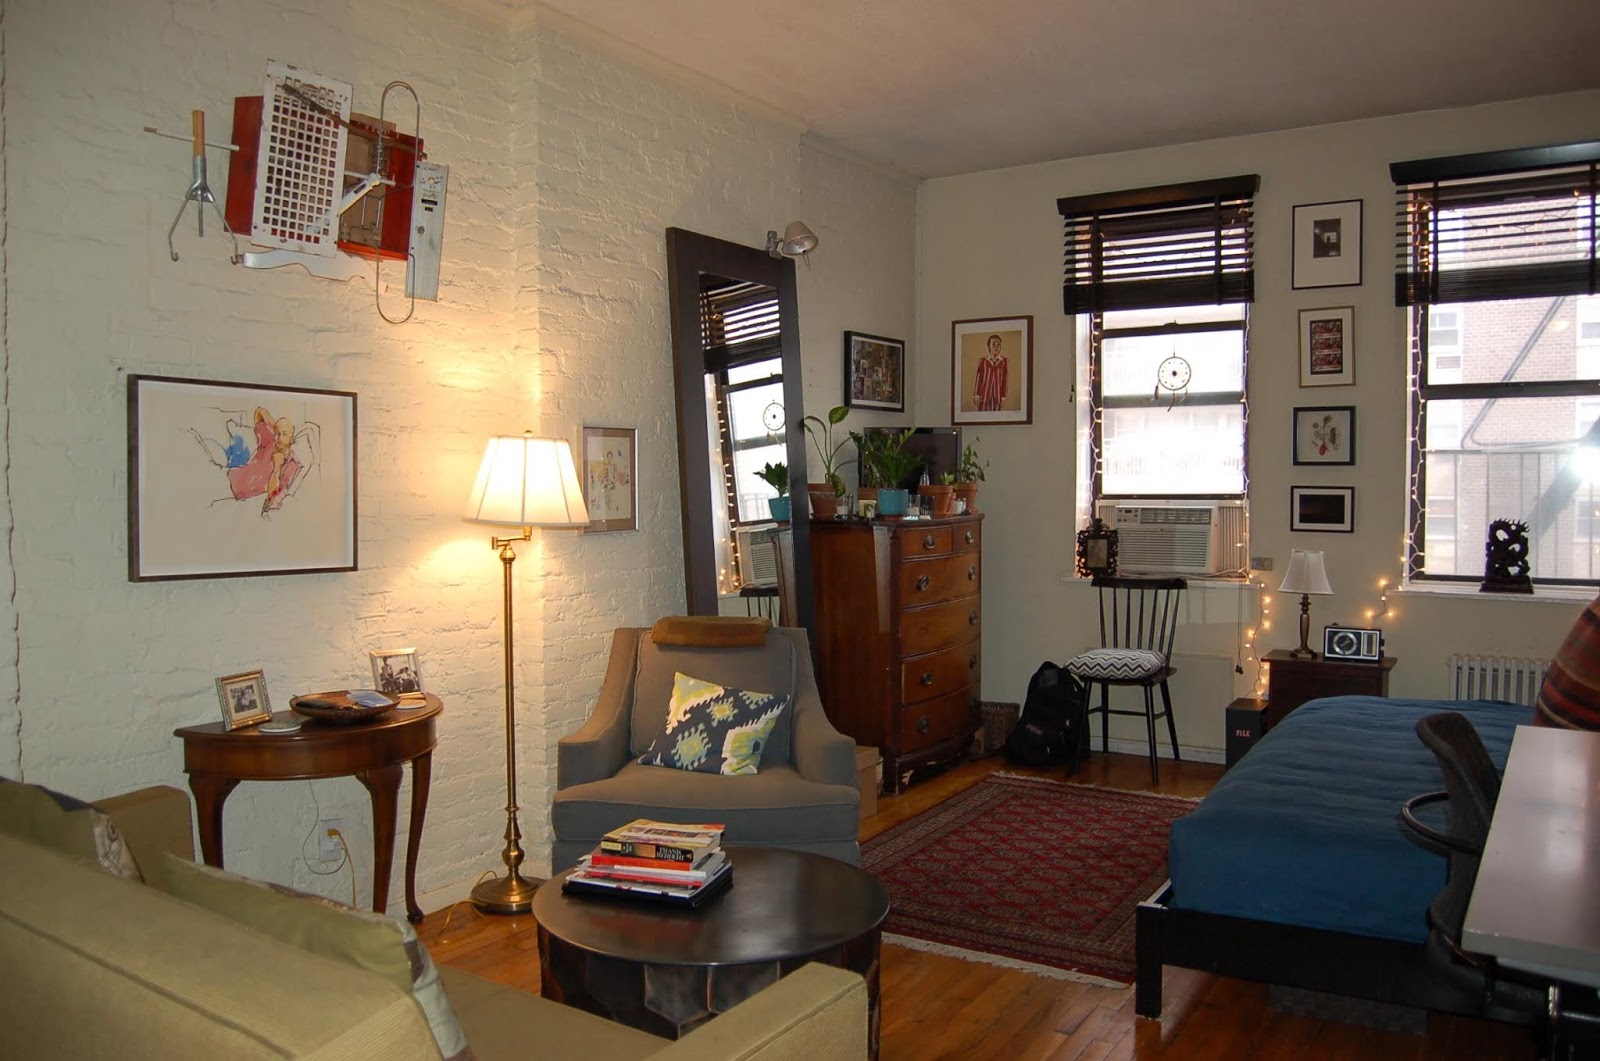 East Village, New York Rooms for Rent and Apartment Shares